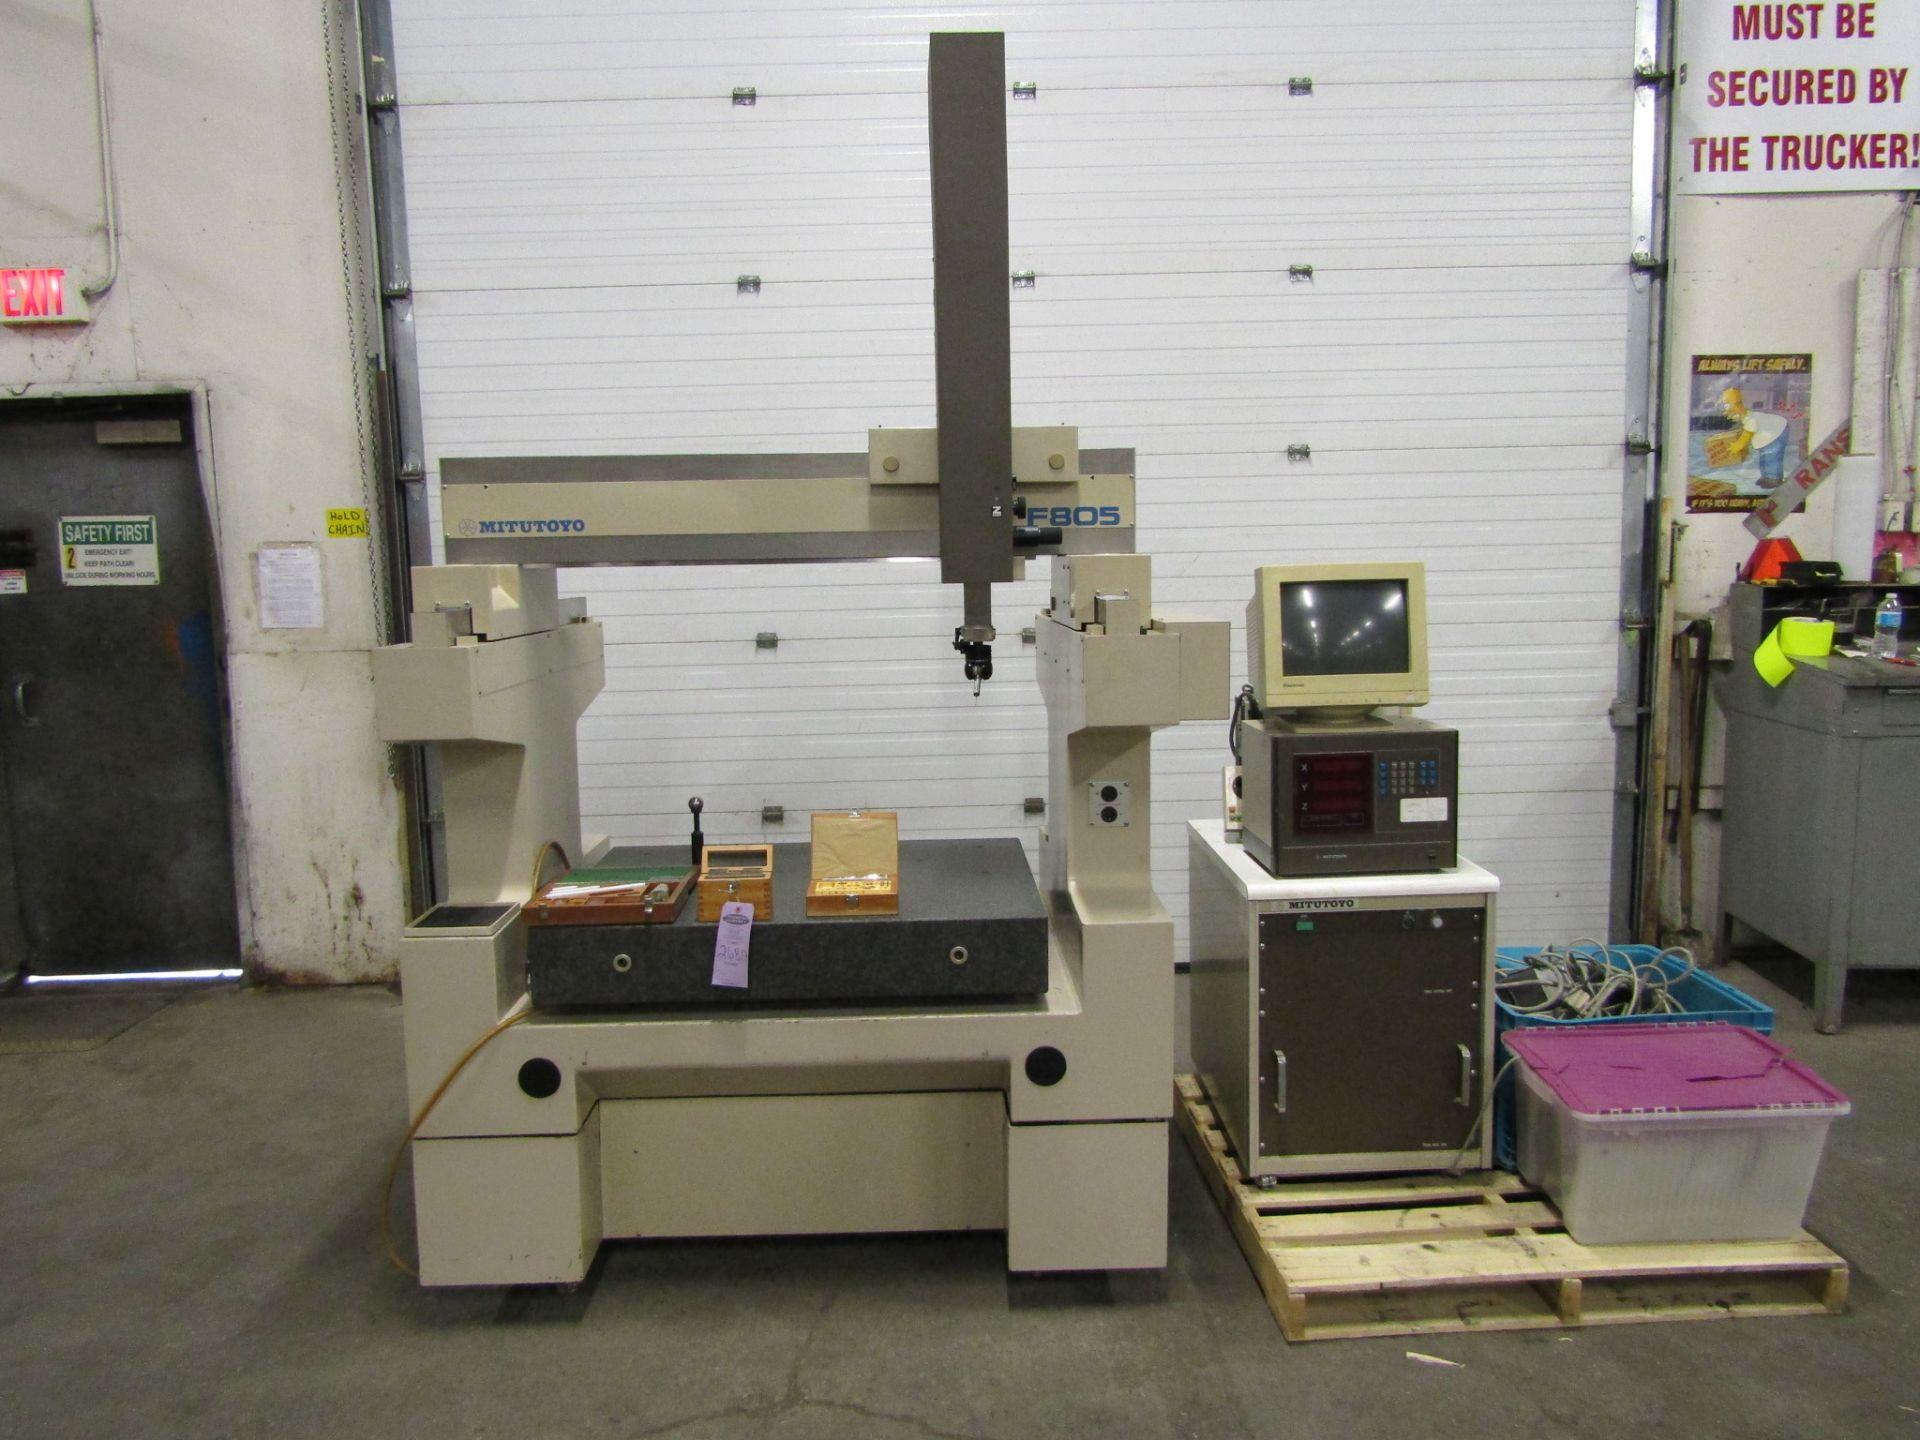 Mitutoyo model F805 CMM with 32 X 22 X 18" range complete with Renishaw PH8 Probe with attachments